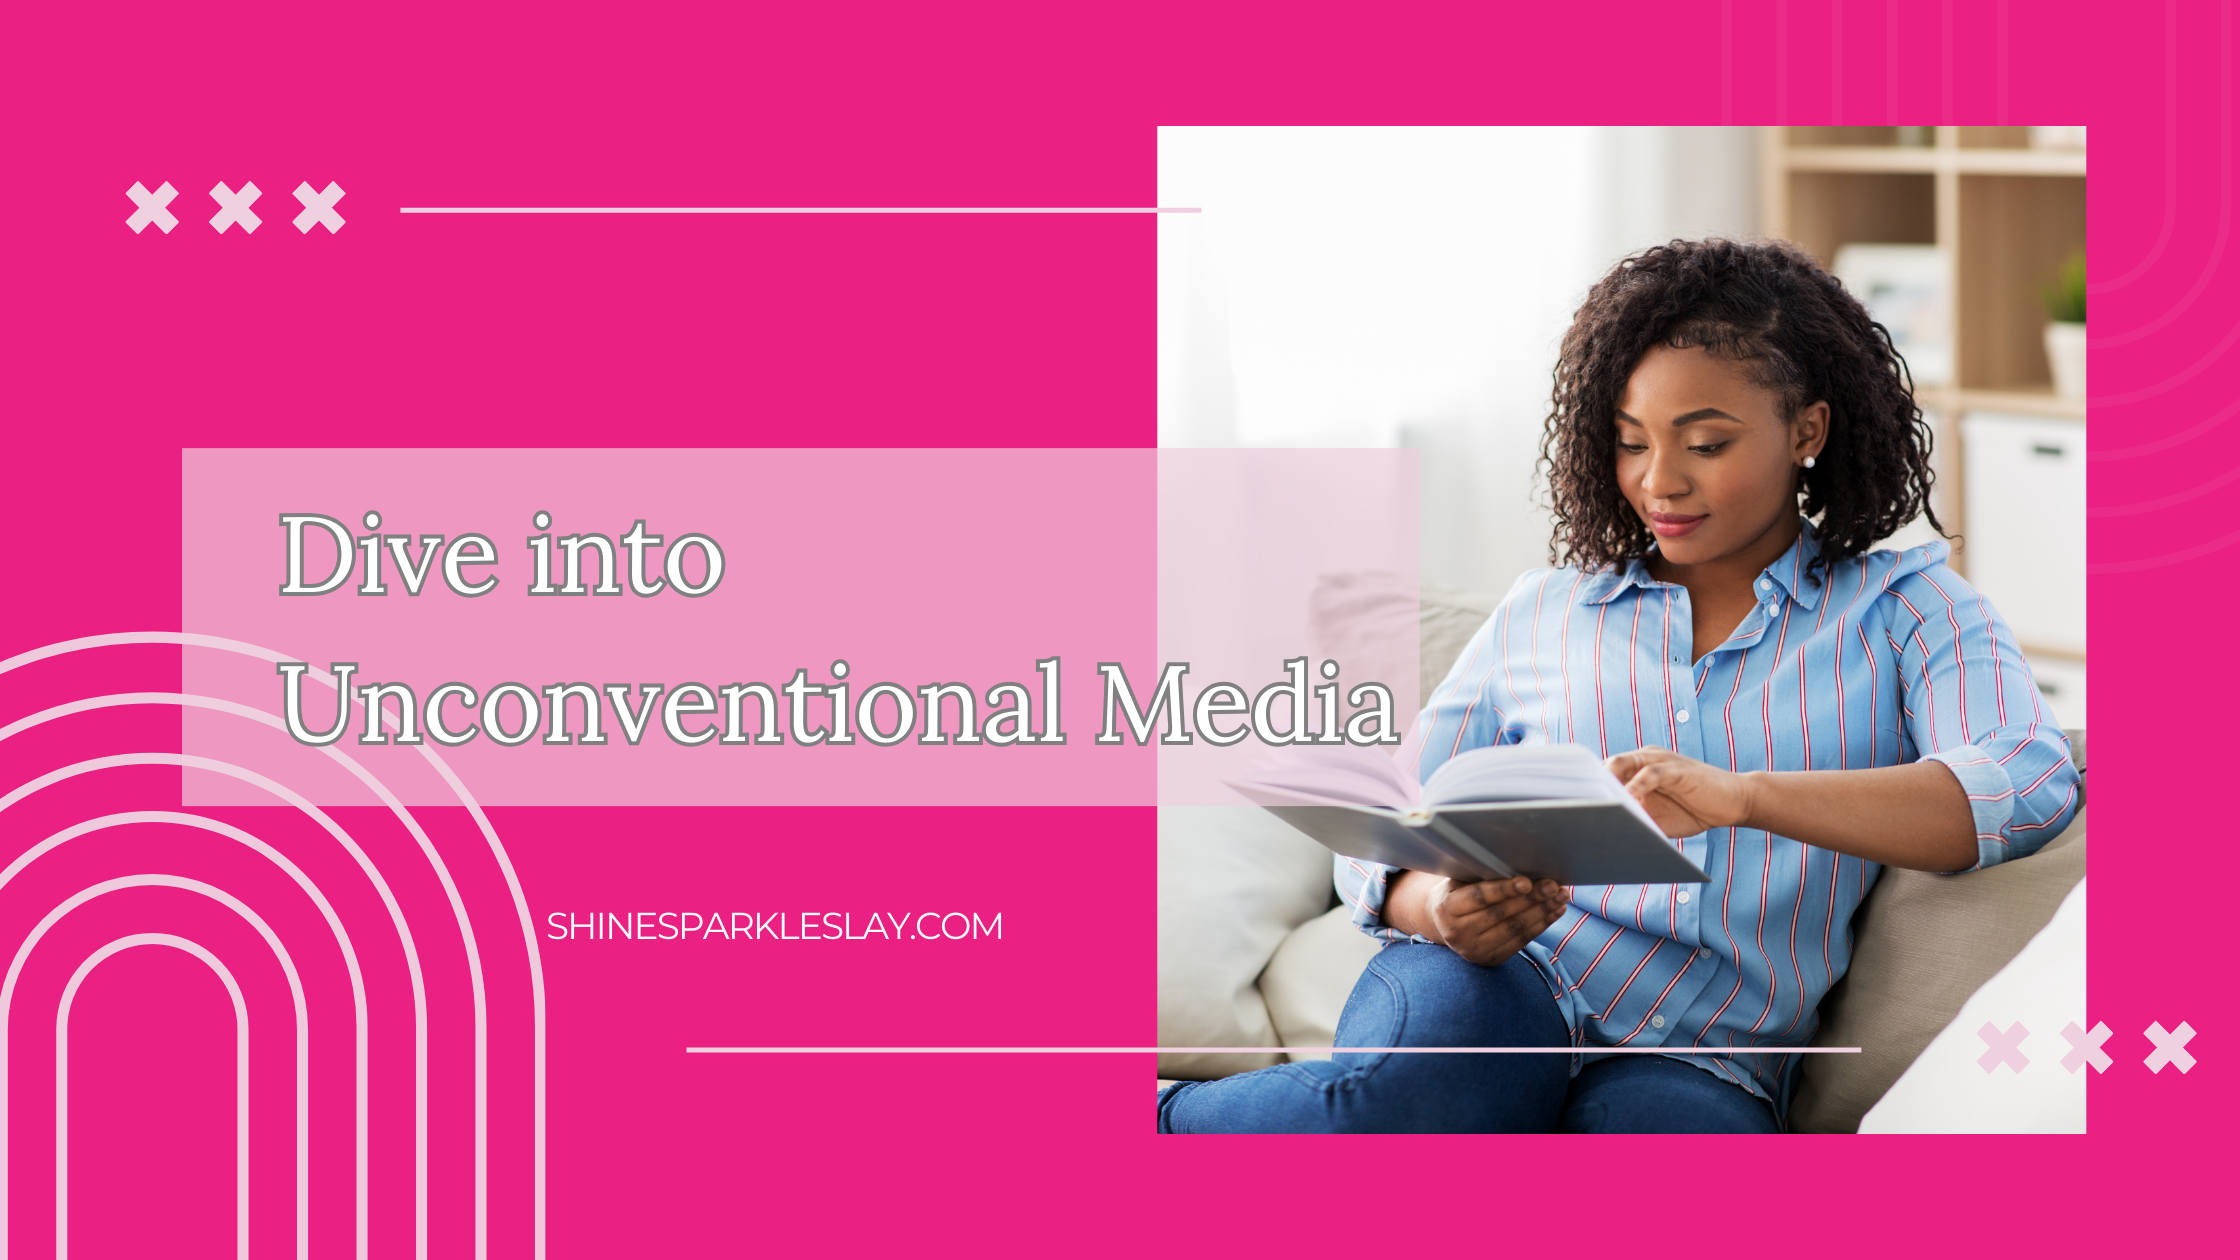 Dive into Unconventional Media